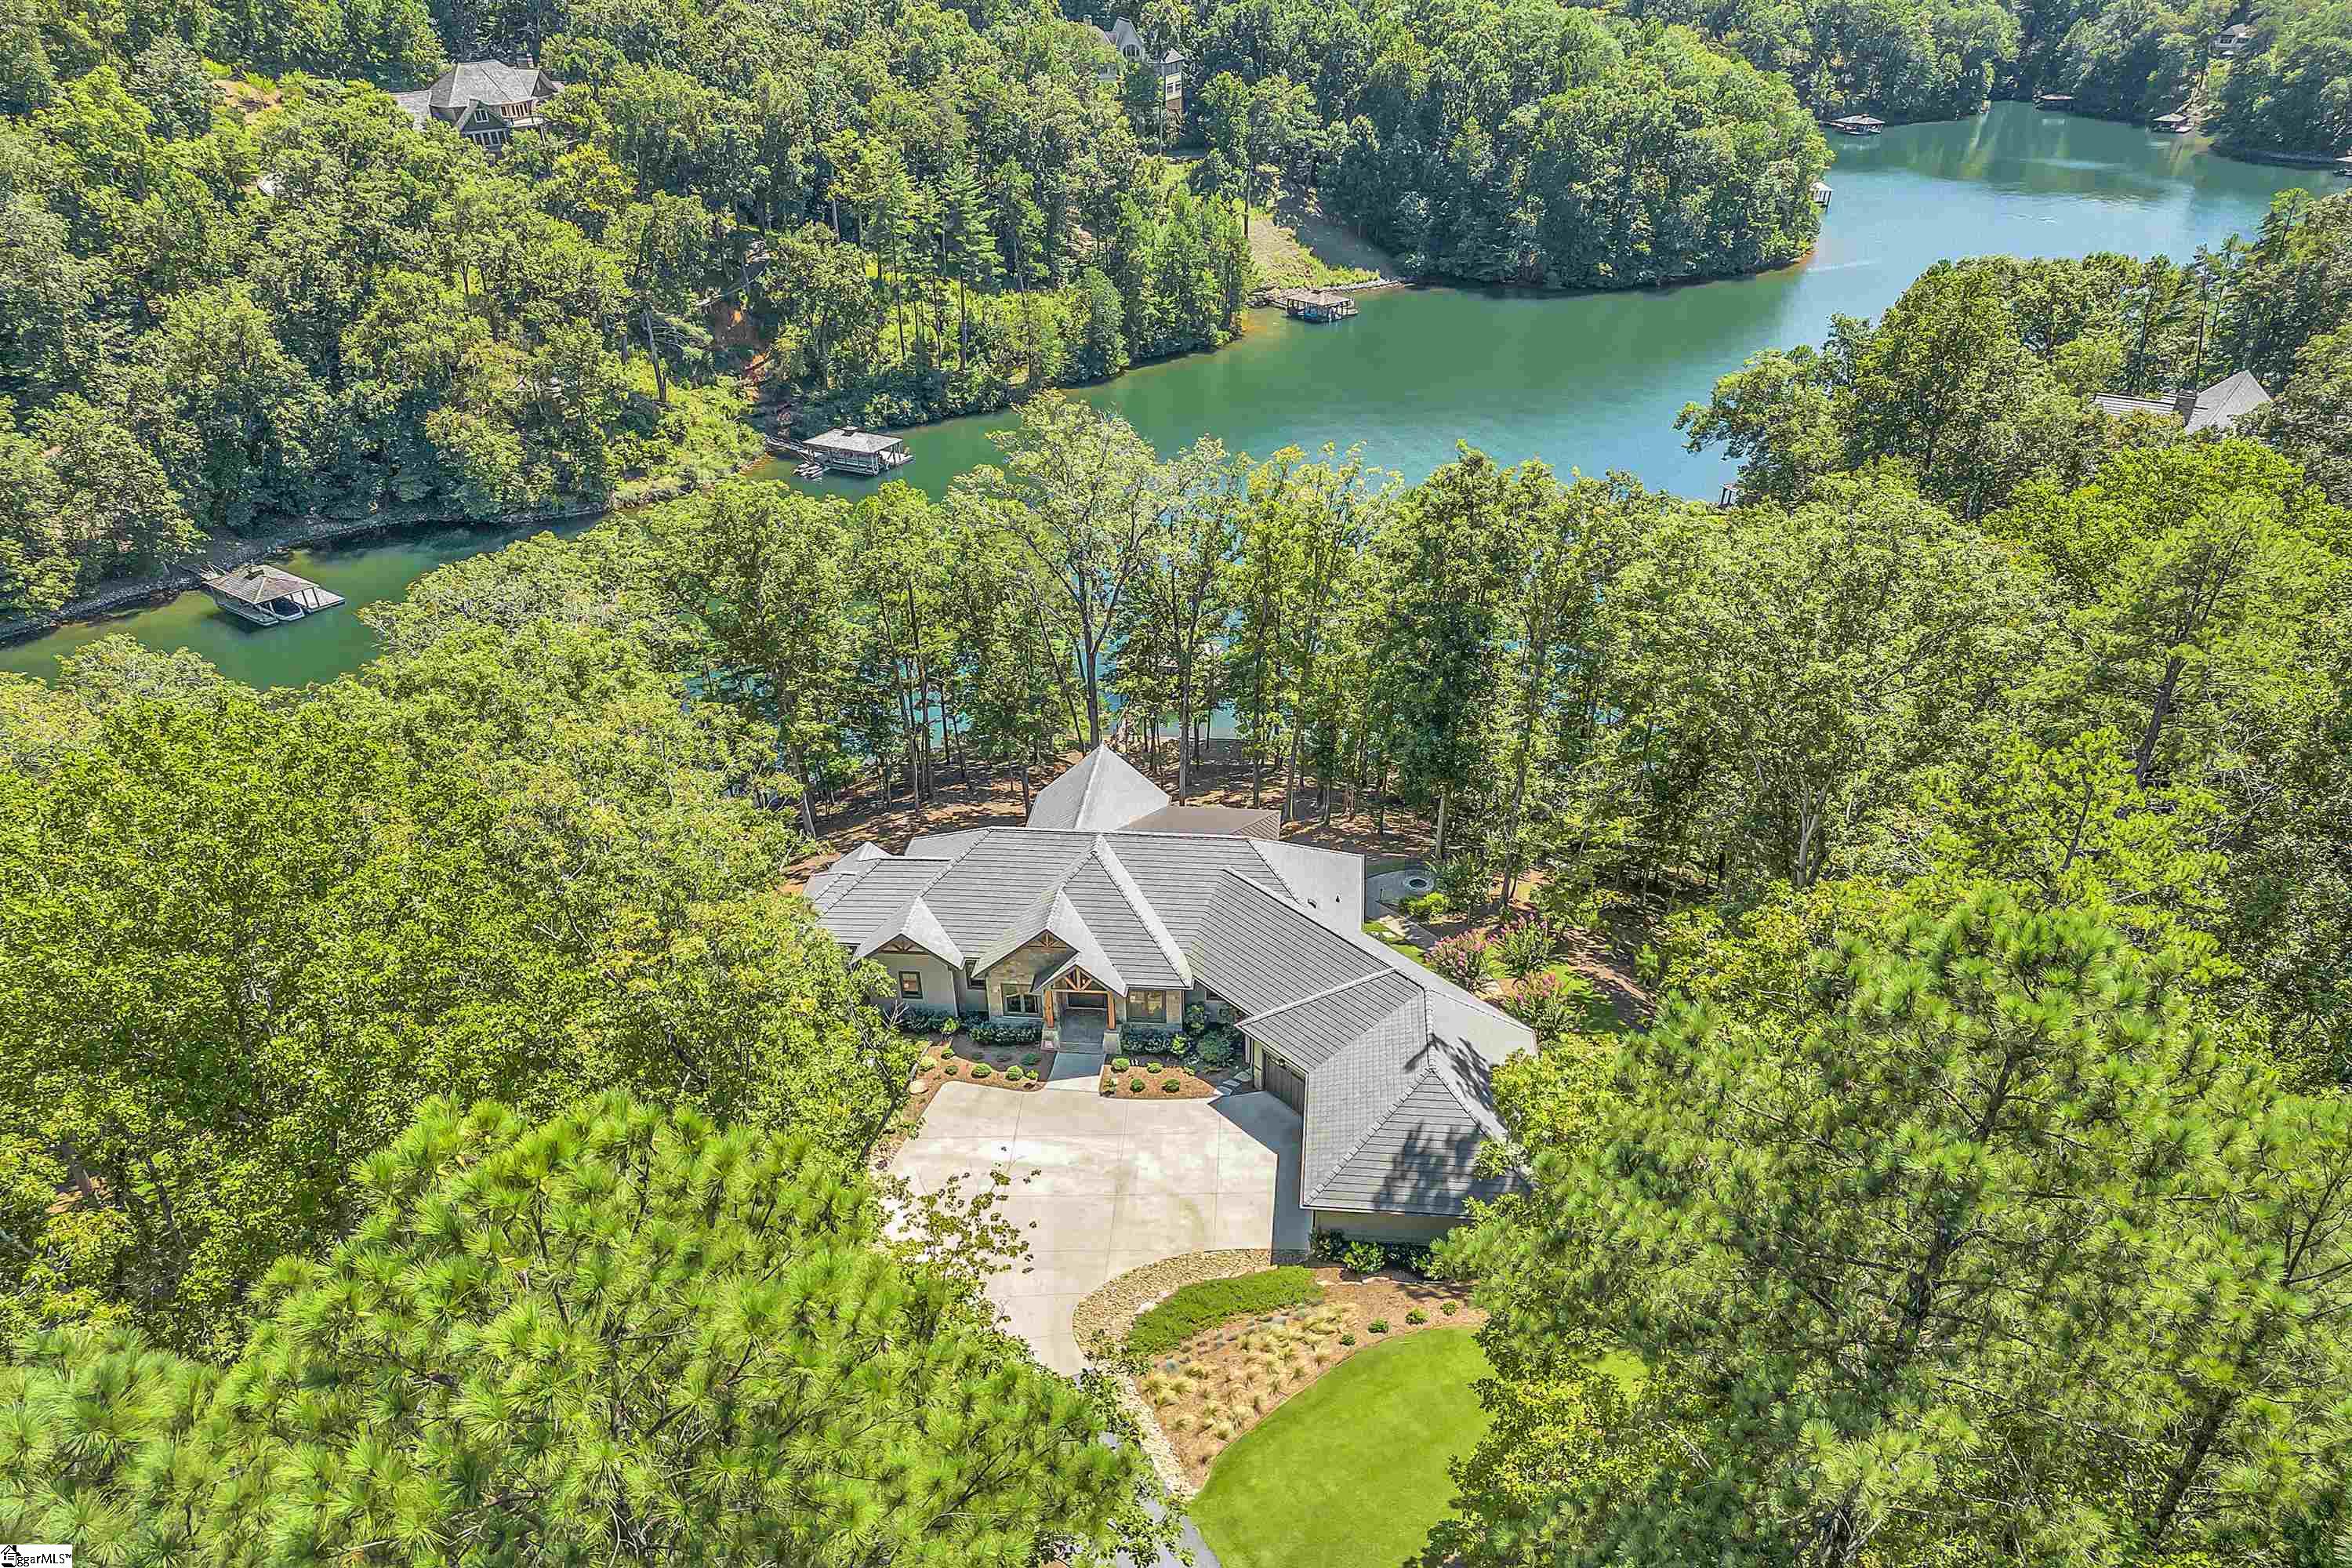 Located on one of the most sought-after sections in The Reserve, this meticulous custom home truly captures the essence of Lake Keowee living. Nestled in a cove off the main channel, this stunning home provides unparalleled water views with nearly 270 feet of shoreline. Inside, you'll find an expansive living room, dining area, and kitchen, along with a fabulous keeping room boasting exquisite water views from every room. The main floor also features a serene primary bedroom with a luxurious bath, perfect for your own private getaway even when hosting large groups. Outside, the sprawling deck with phantom screens provides plenty of space for entertaining or simply pure relaxation. You’ll also enjoy the grill masters dream station with easy access into the main kitchen. The home also offers four additional bedrooms, one that can serve as a second primary suite with heated bathroom floors, a bunk room, a bar, wine closet, and a spacious bonus area for games with family and friends. Don't miss the oversized 3 car garage, additional entertaining space with walk out patio and fire pit area, and tons of storage. Just a short walk to your private dock which provides easy getting to and from the home after a perfect day on the lake. The spirit of Lake Keowee is truly captured in this beautiful home, while some of the best private club amenities in the southeast are a stone's throw away. RLK Social Membership of $13,000 is required at closing.